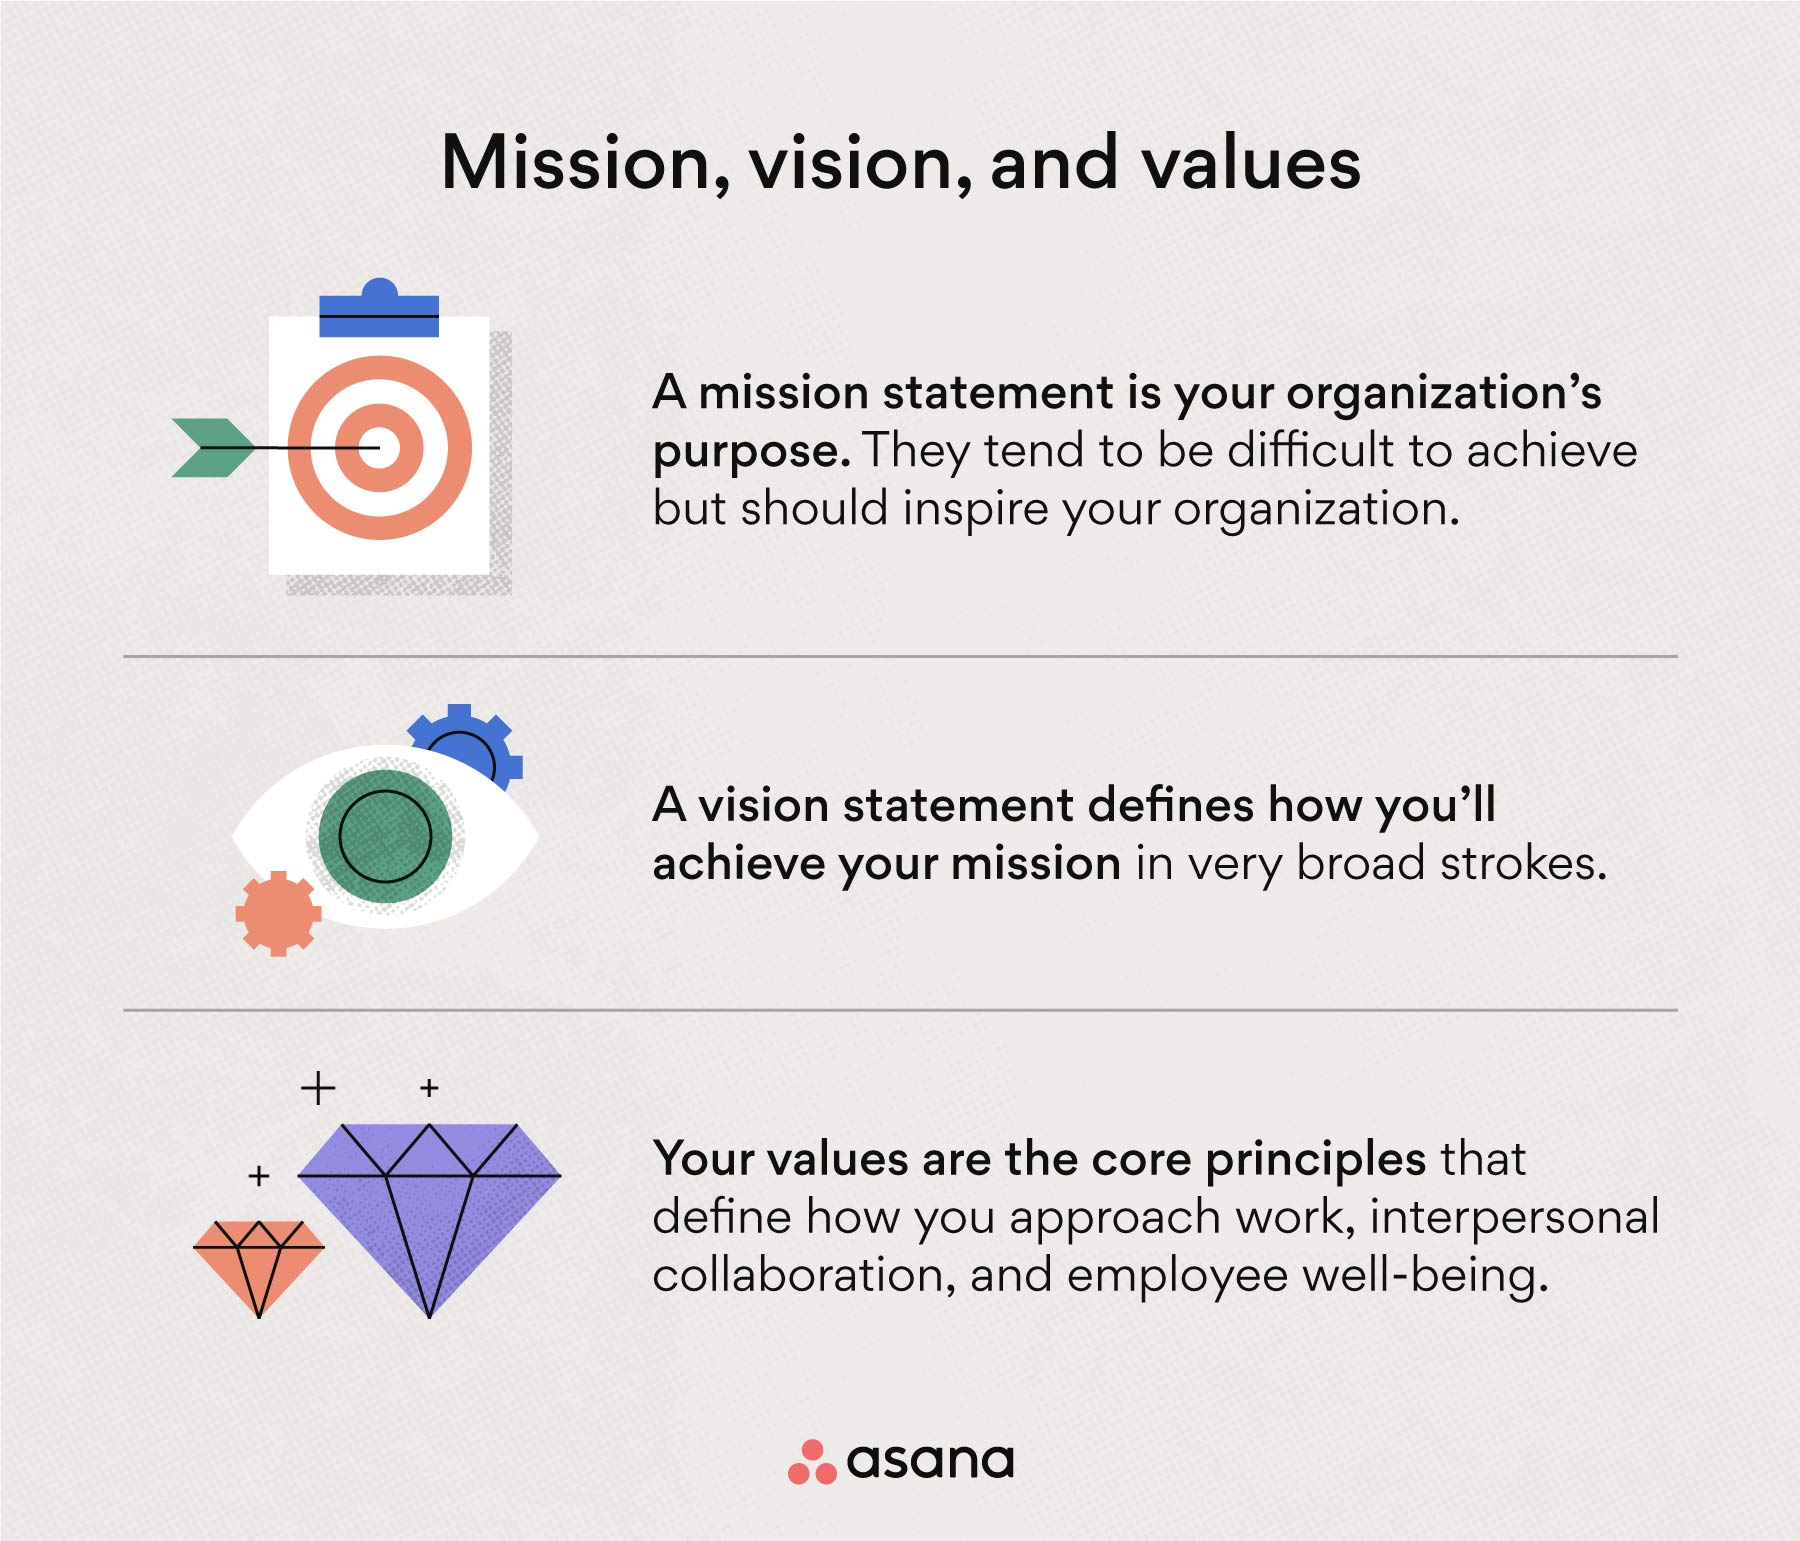 [inline illustration] Mission, vision, and values definition (infographic)